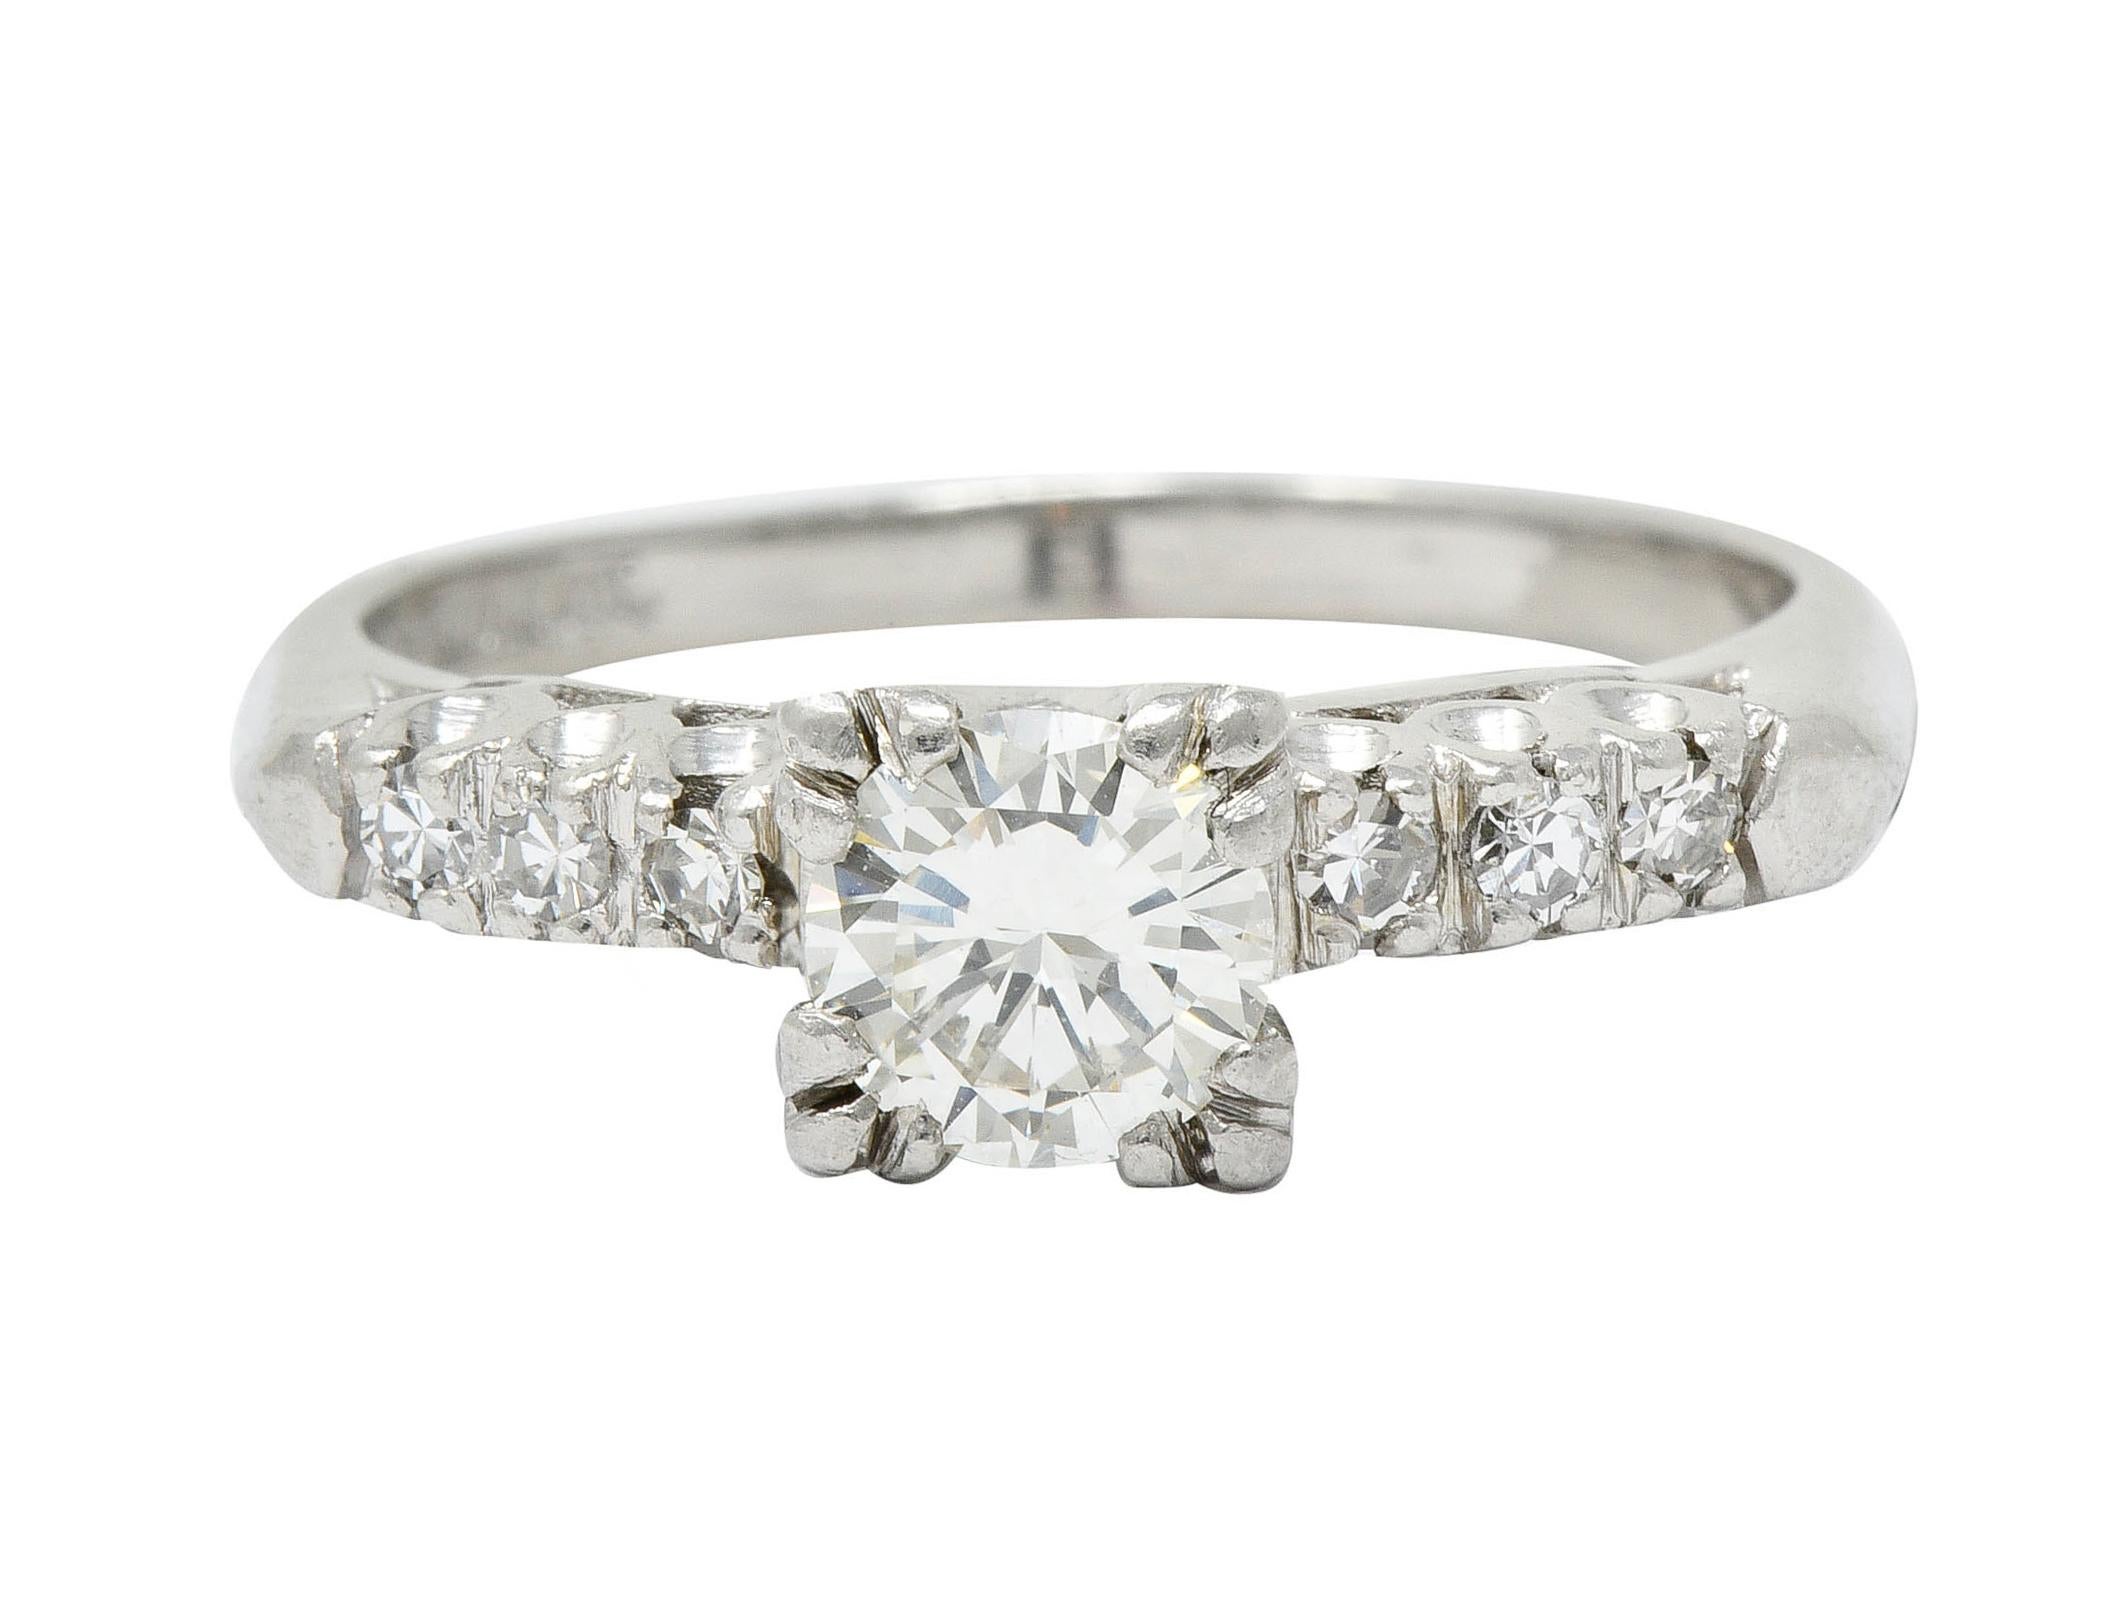 Centering a transitional cut diamond weighing approximately 0.60 carat; I color with VS clarity

Set with tri-bead prongs in a stylized basket and flanked by fishtail motif shoulders

Set with single cut diamonds weighing in total approximately 0.18